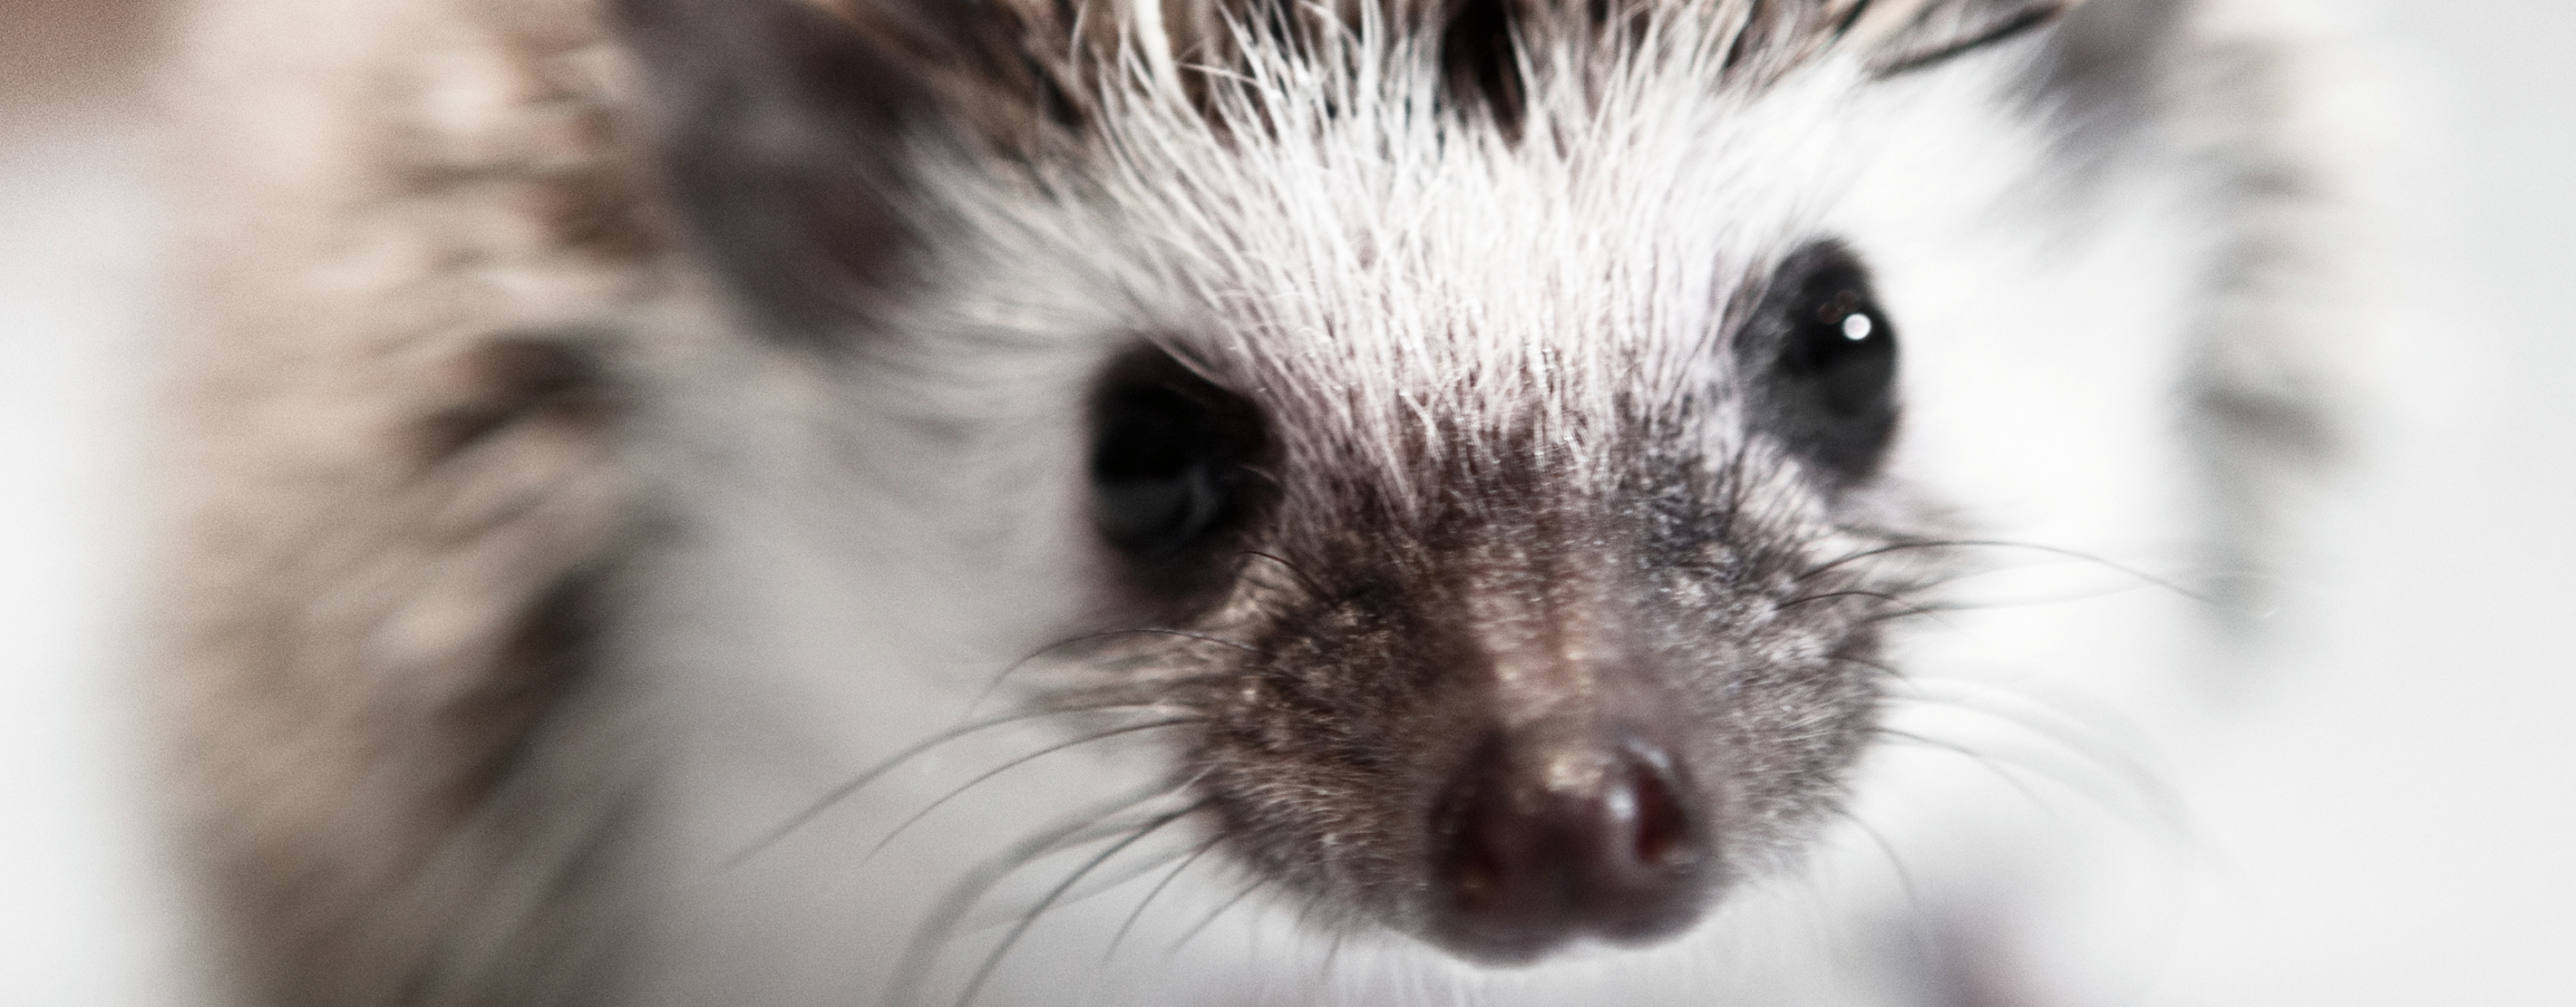 A Picture Of A Hedgehog's Face